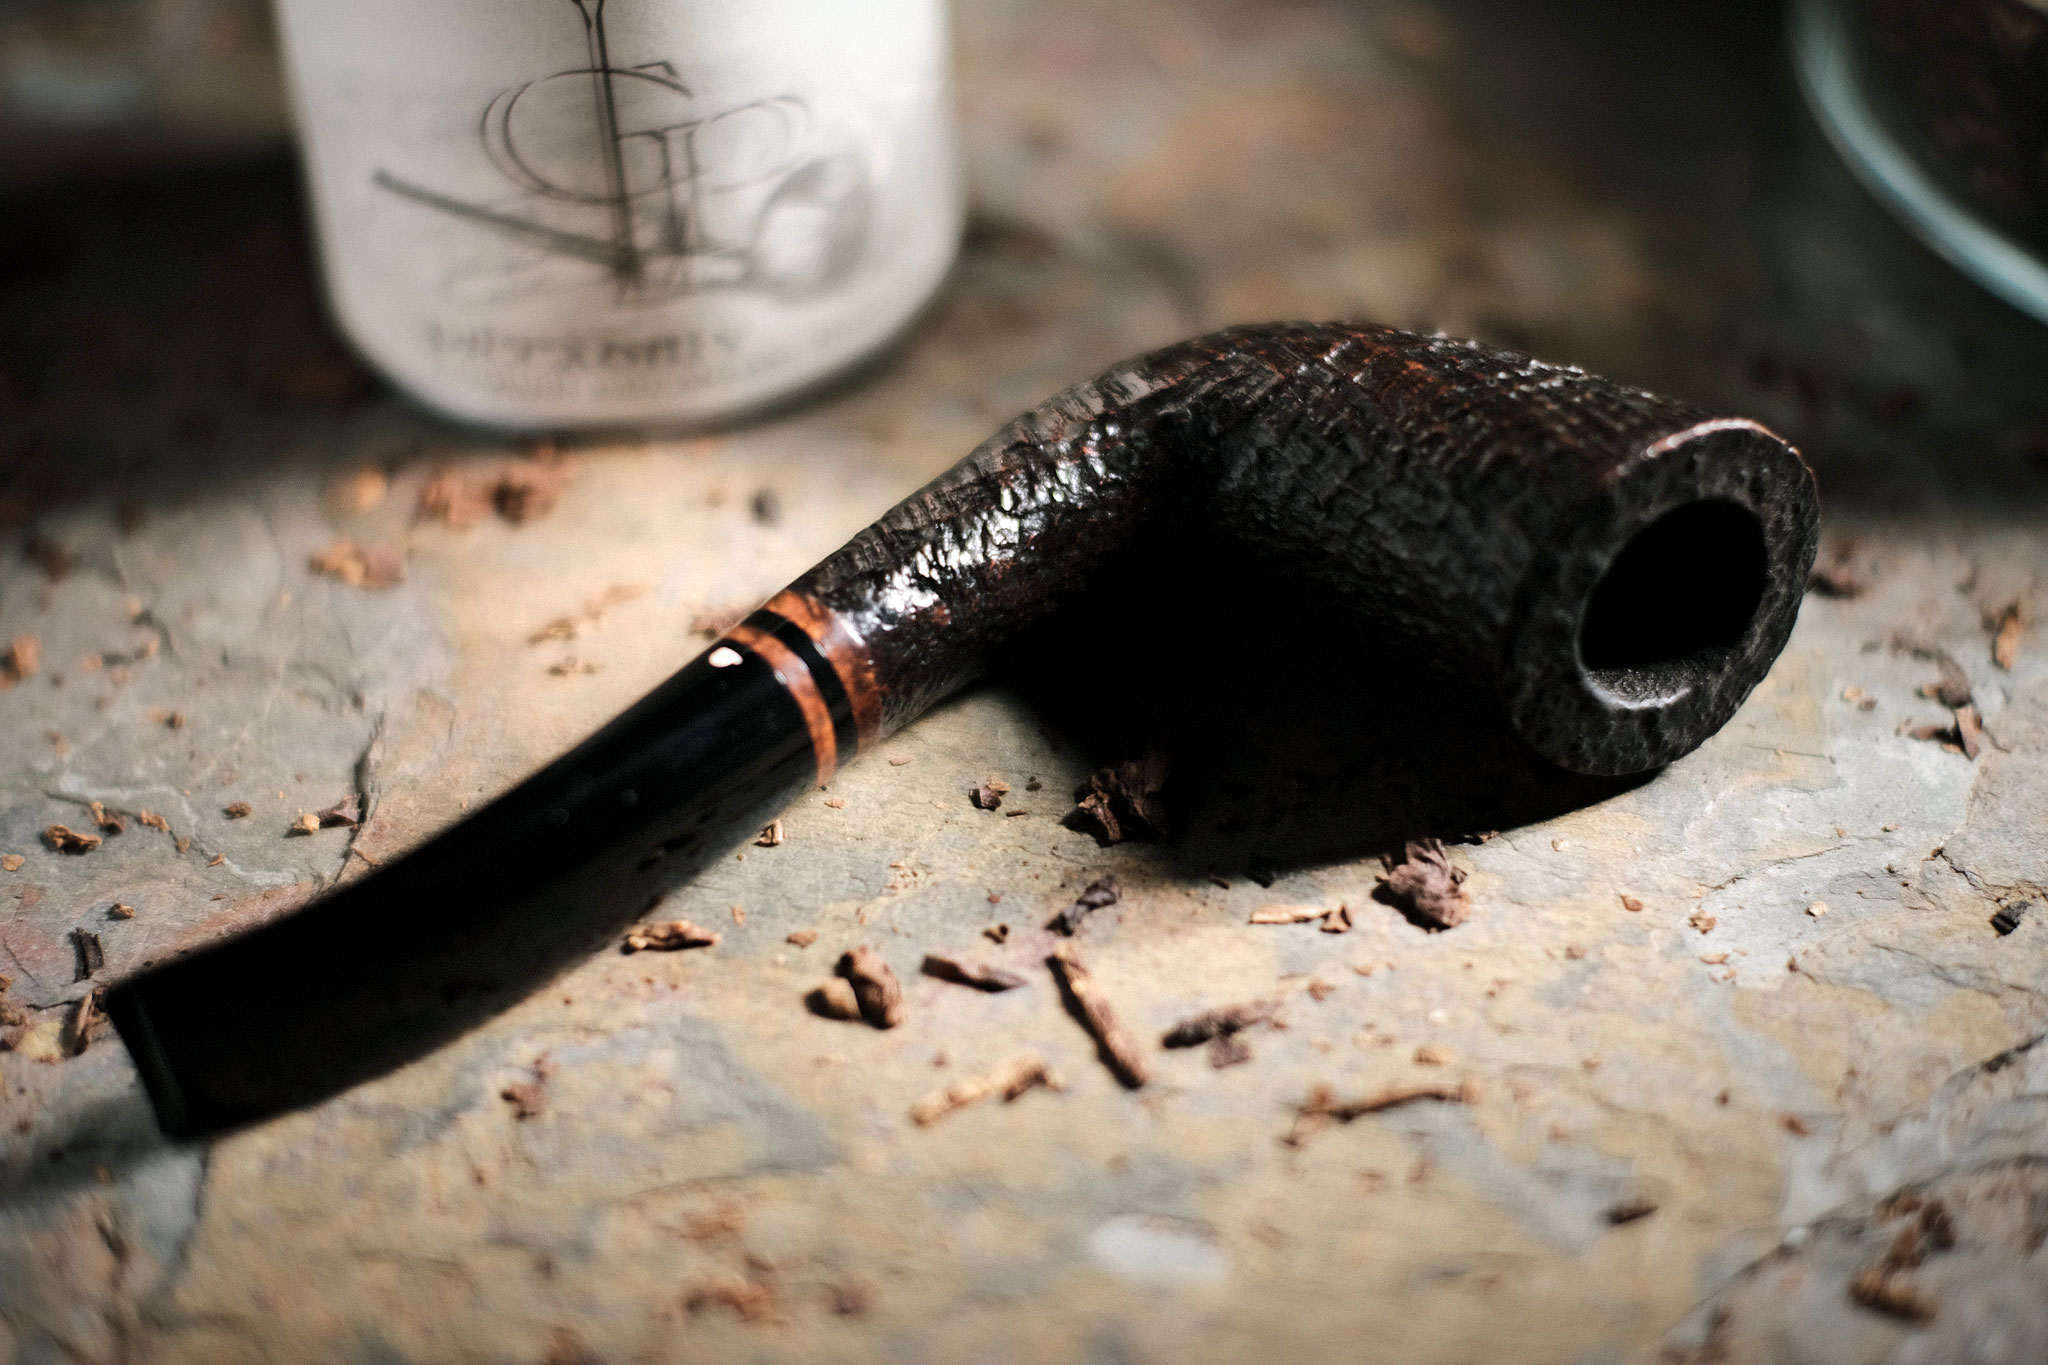 Pease's Paolo Becker Olifant Pipe